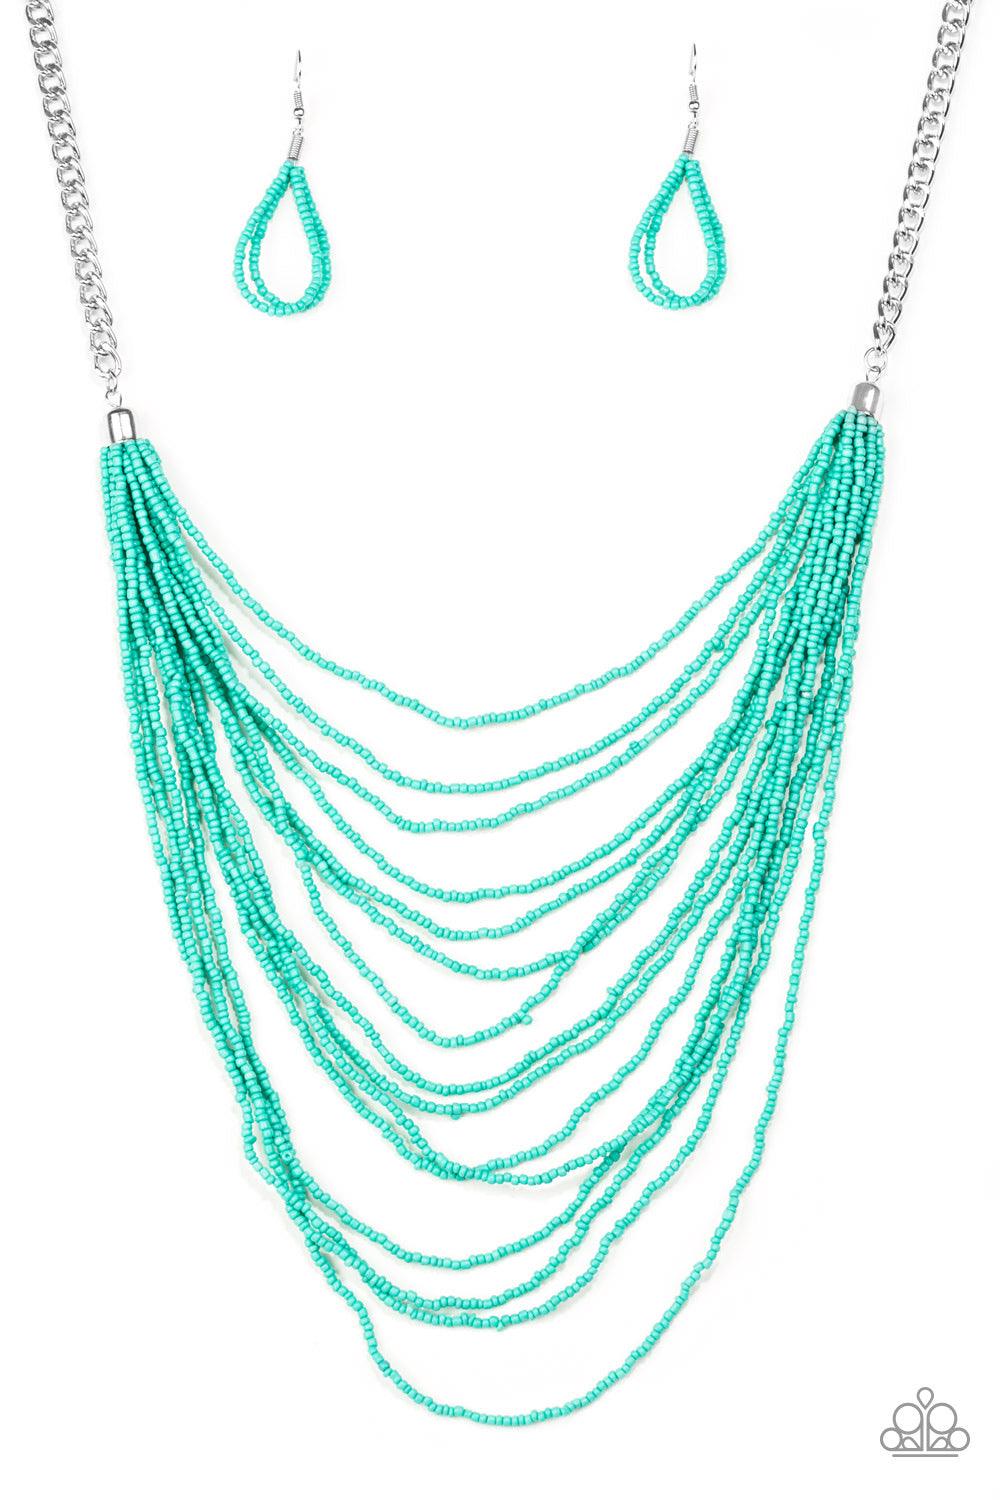 Paparazzi Accessories Bora Bombora - Blue Row after row of refreshing turquoise seed beads cascade down the chest, creating summery layers. Features an adjustable clasp closure. Sold as one individual necklace. Includes one pair of matching earrings. Jewe